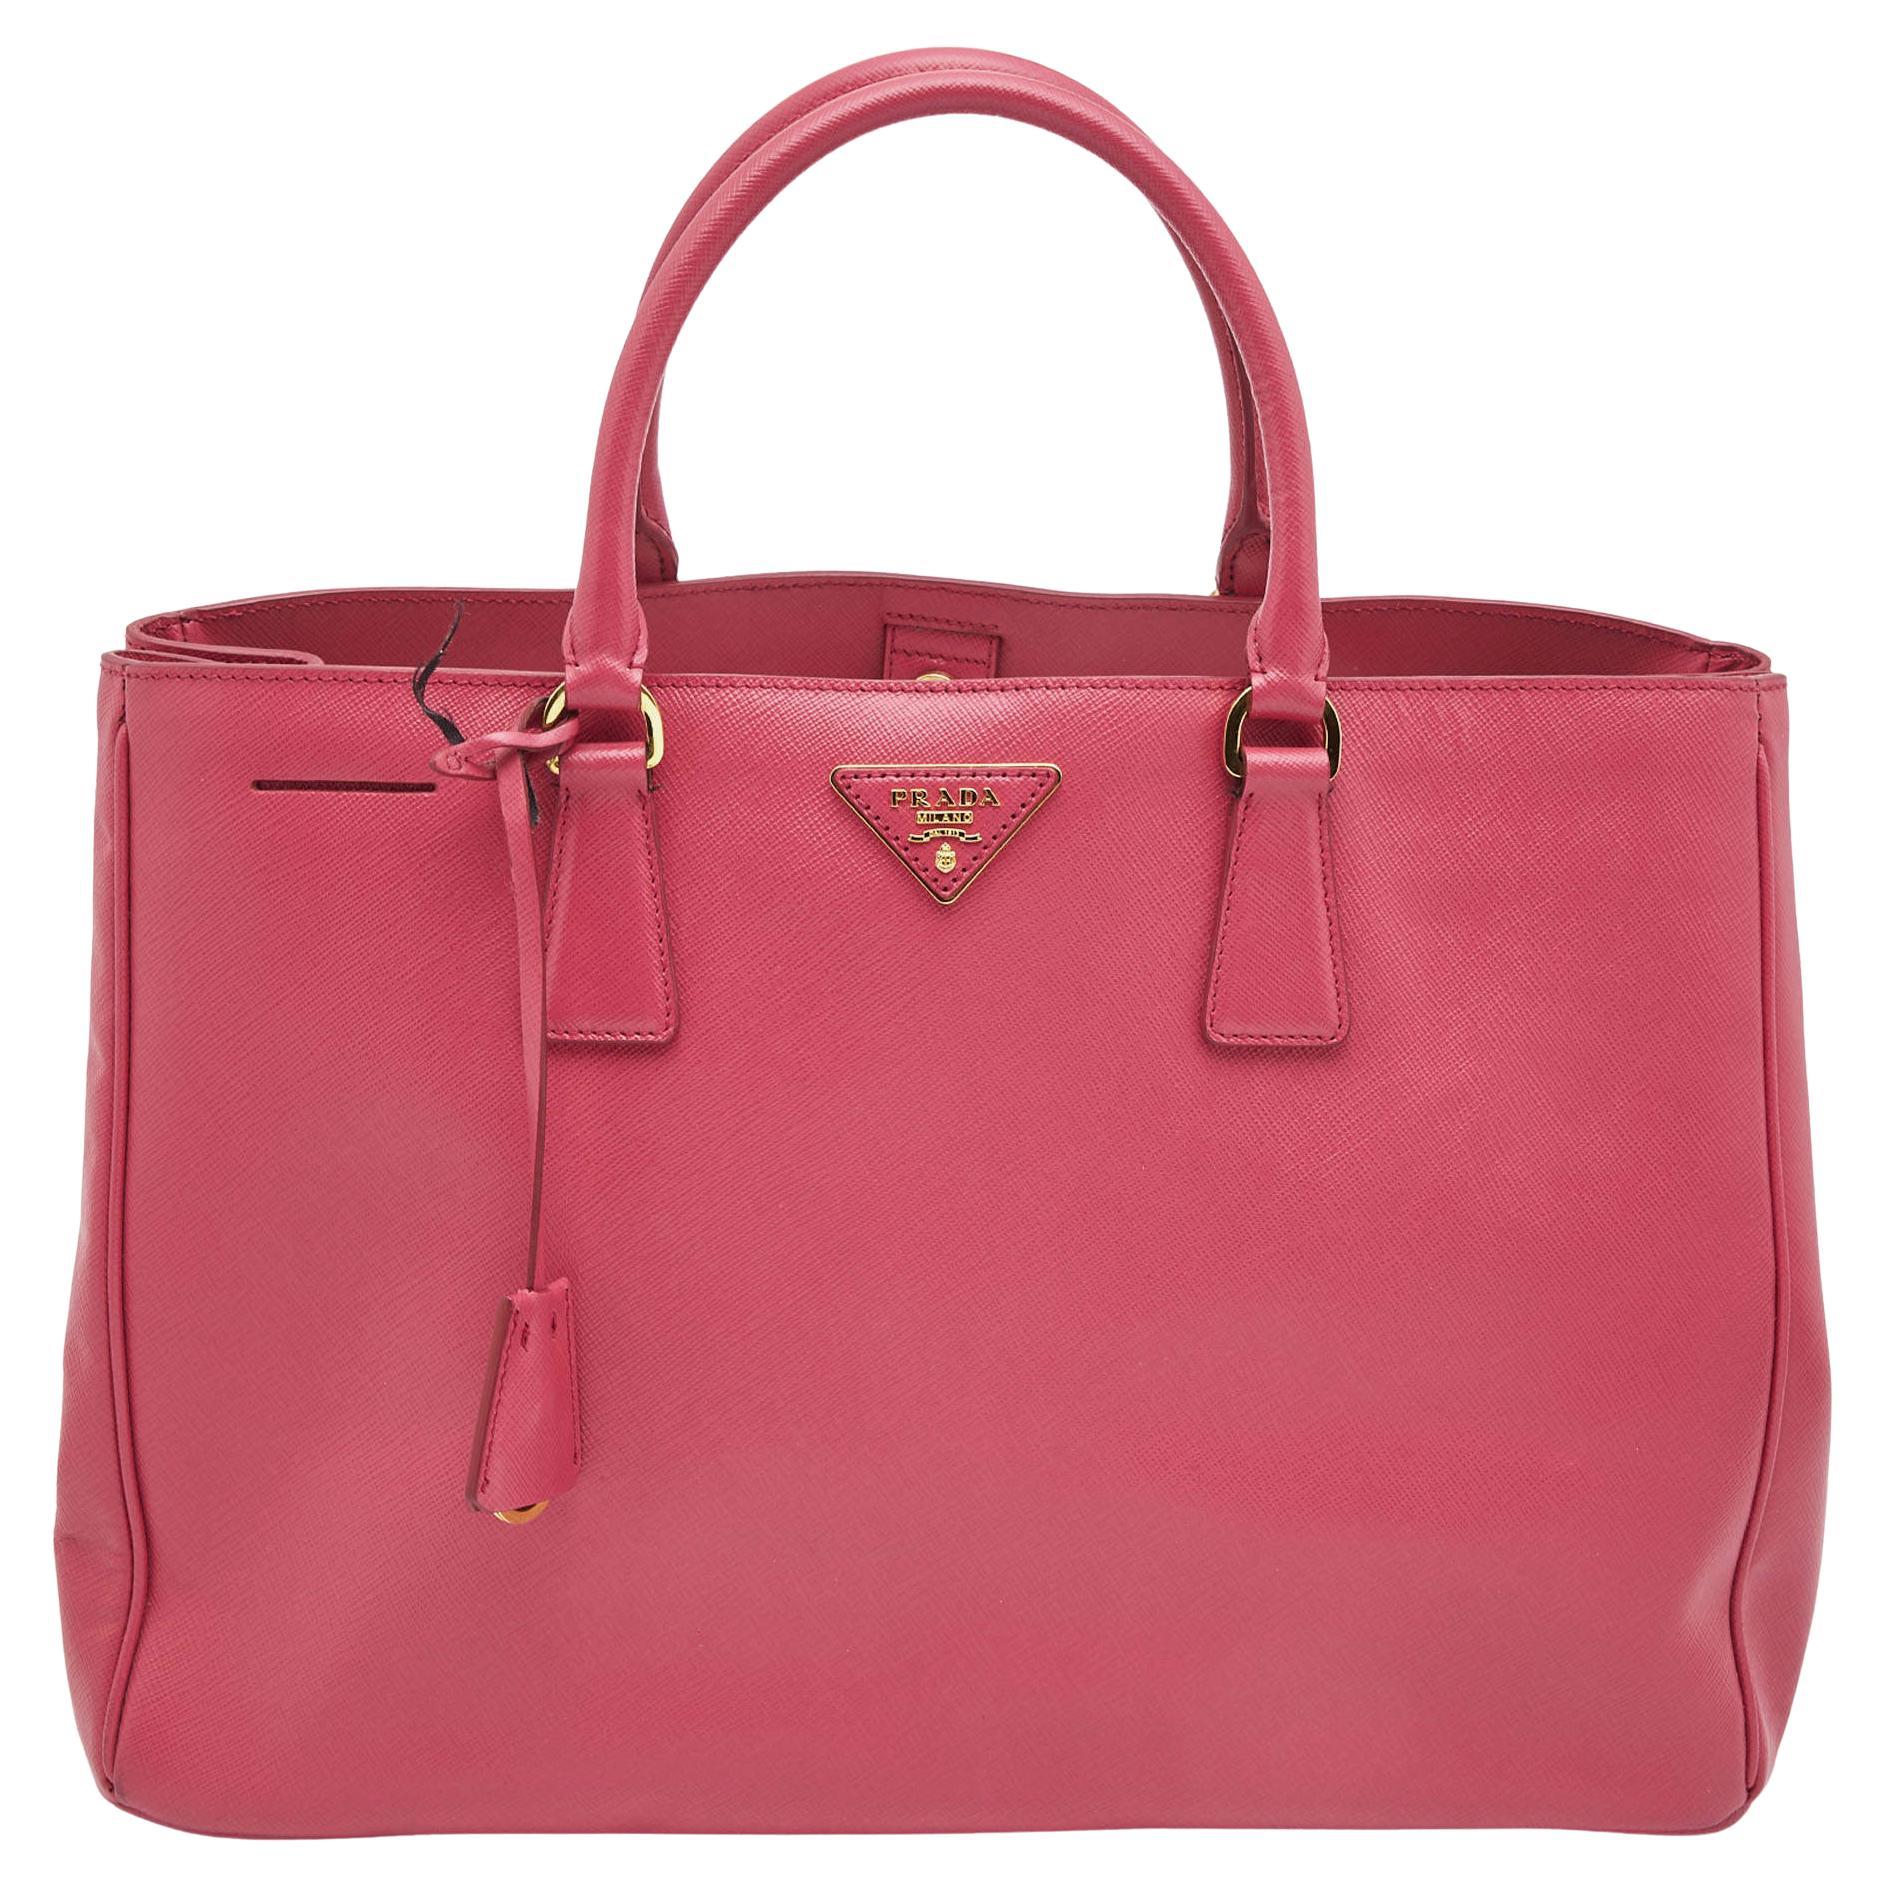 Prada Pink Saffiano Lux Leather Large Gardener's Tote